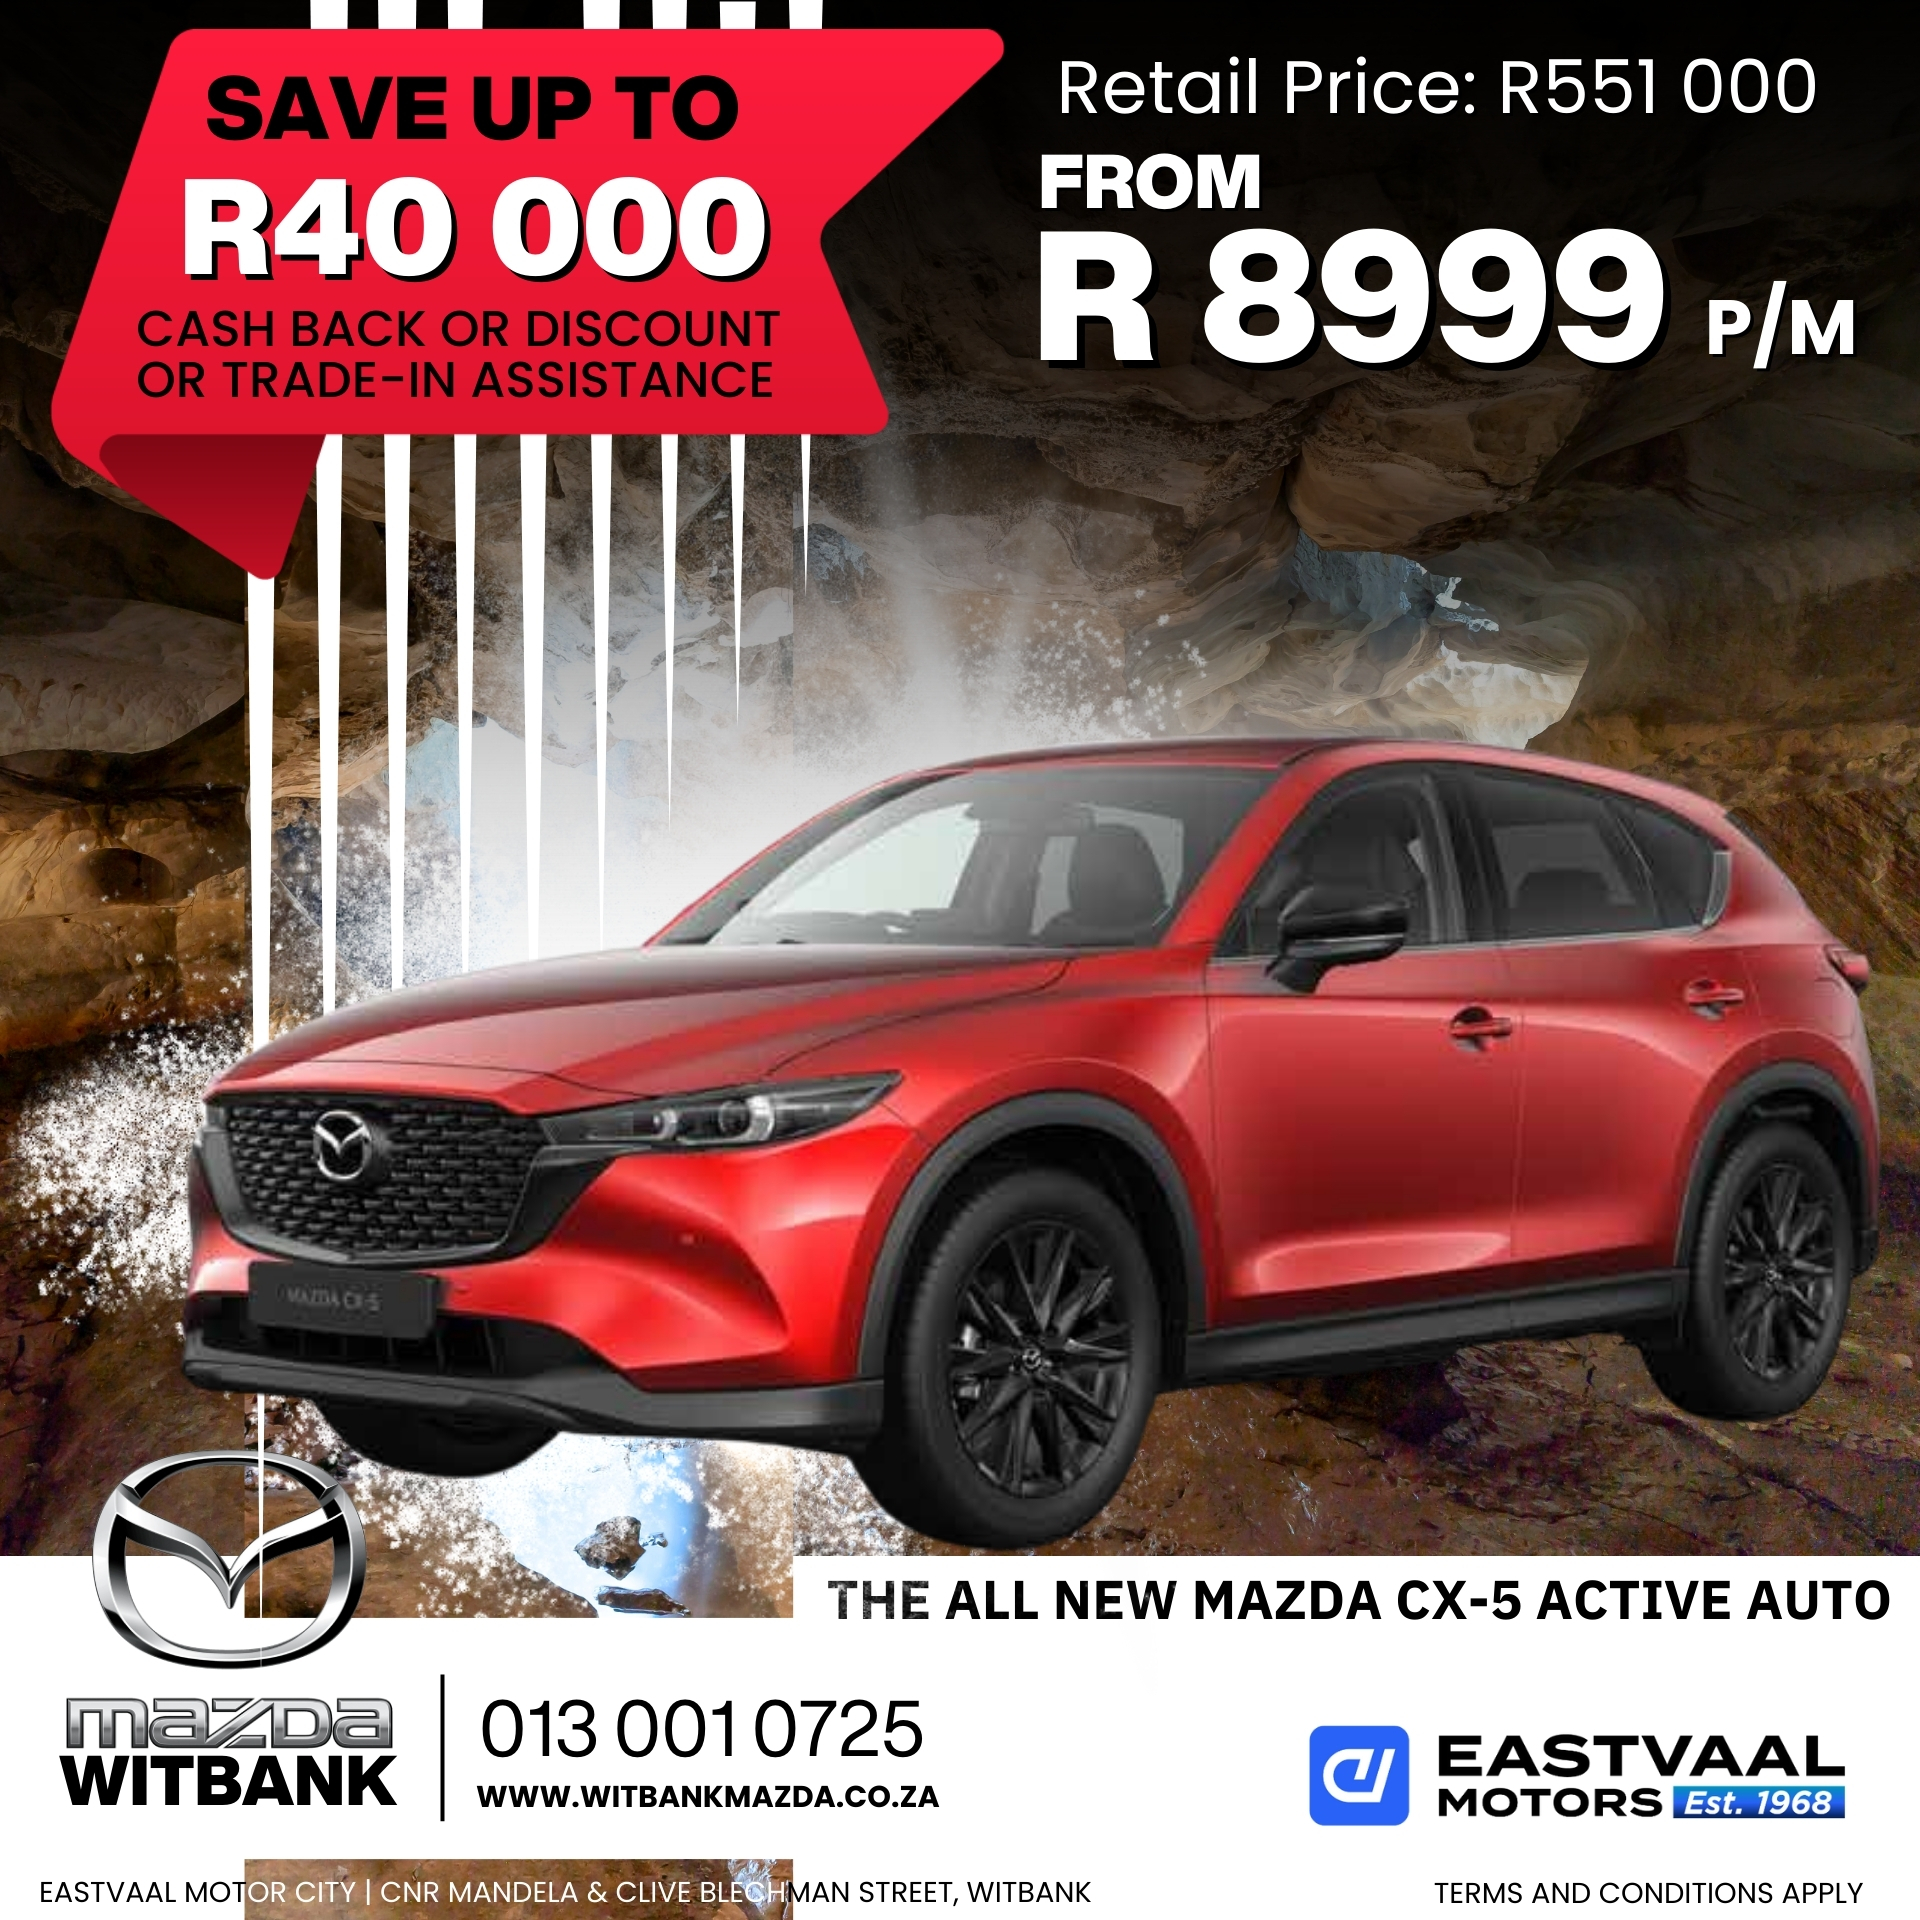 Zoom into July with the style and performance of a Mazda! Find your perfect match at Eastvaal Motor City. image from 